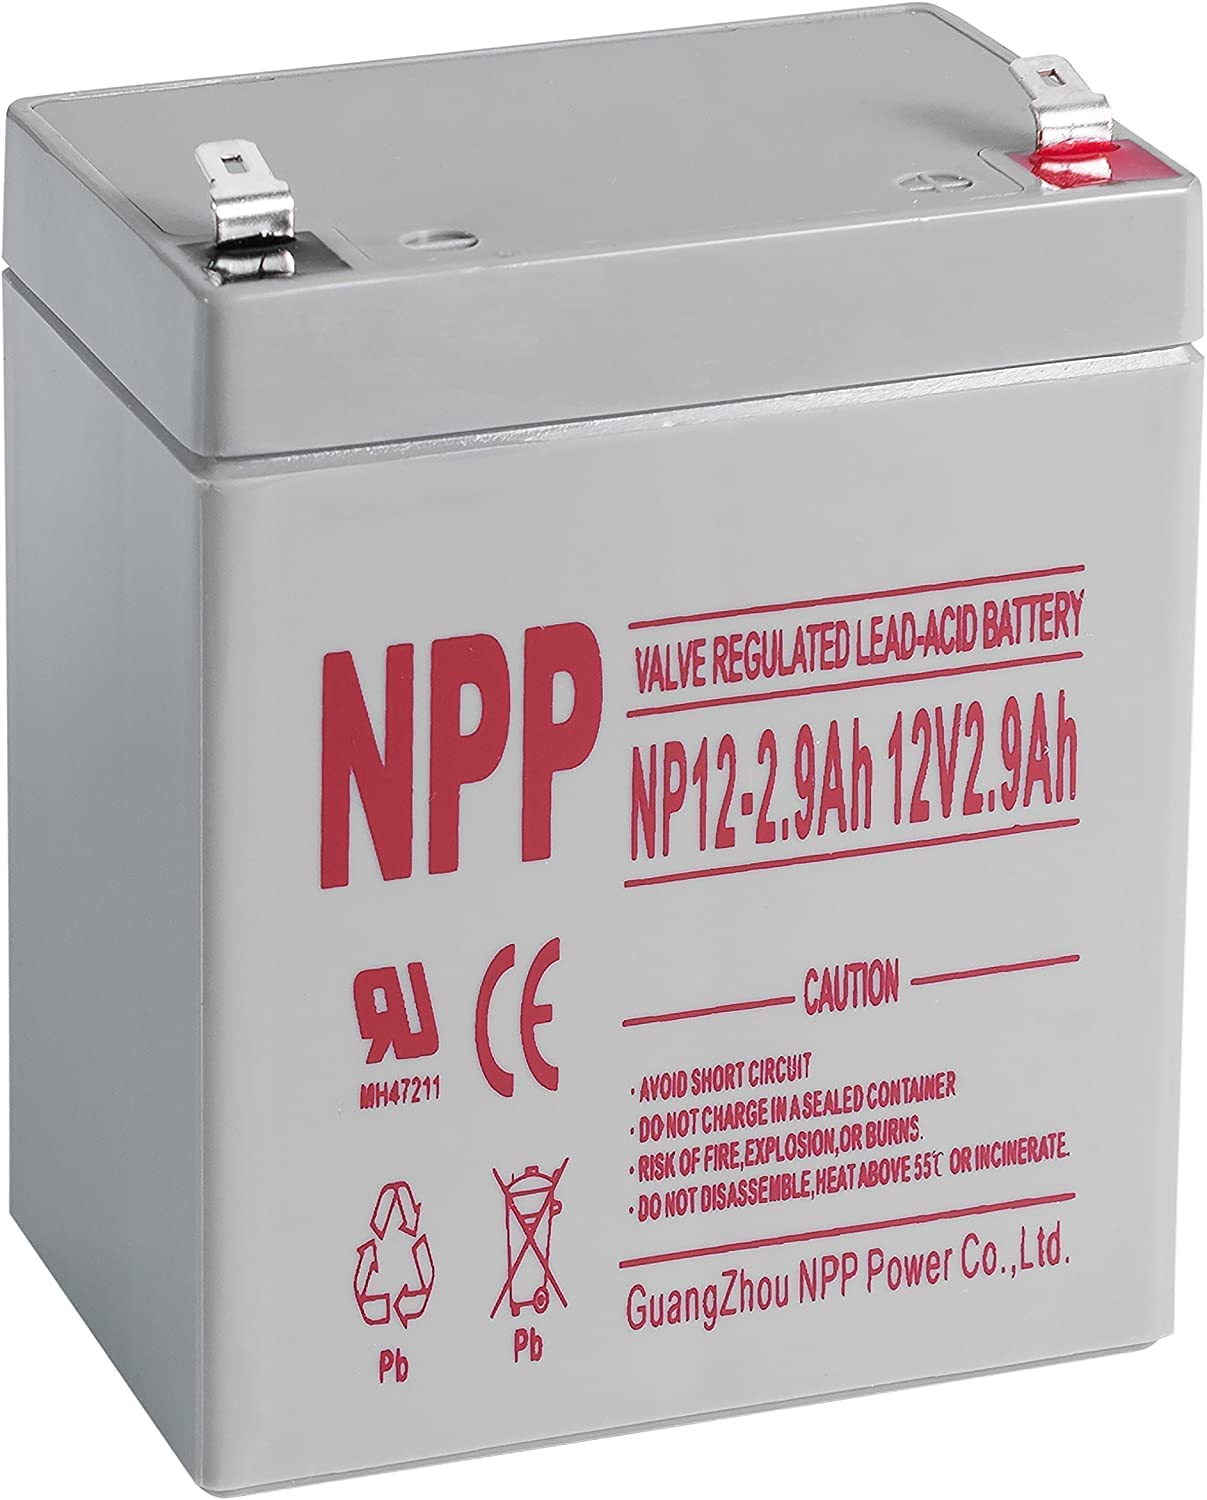 NPP NP12-2.9Ah 12V 2.9Ah Rechargeable Sealed Lead Acid Battery with F1 Terminals 